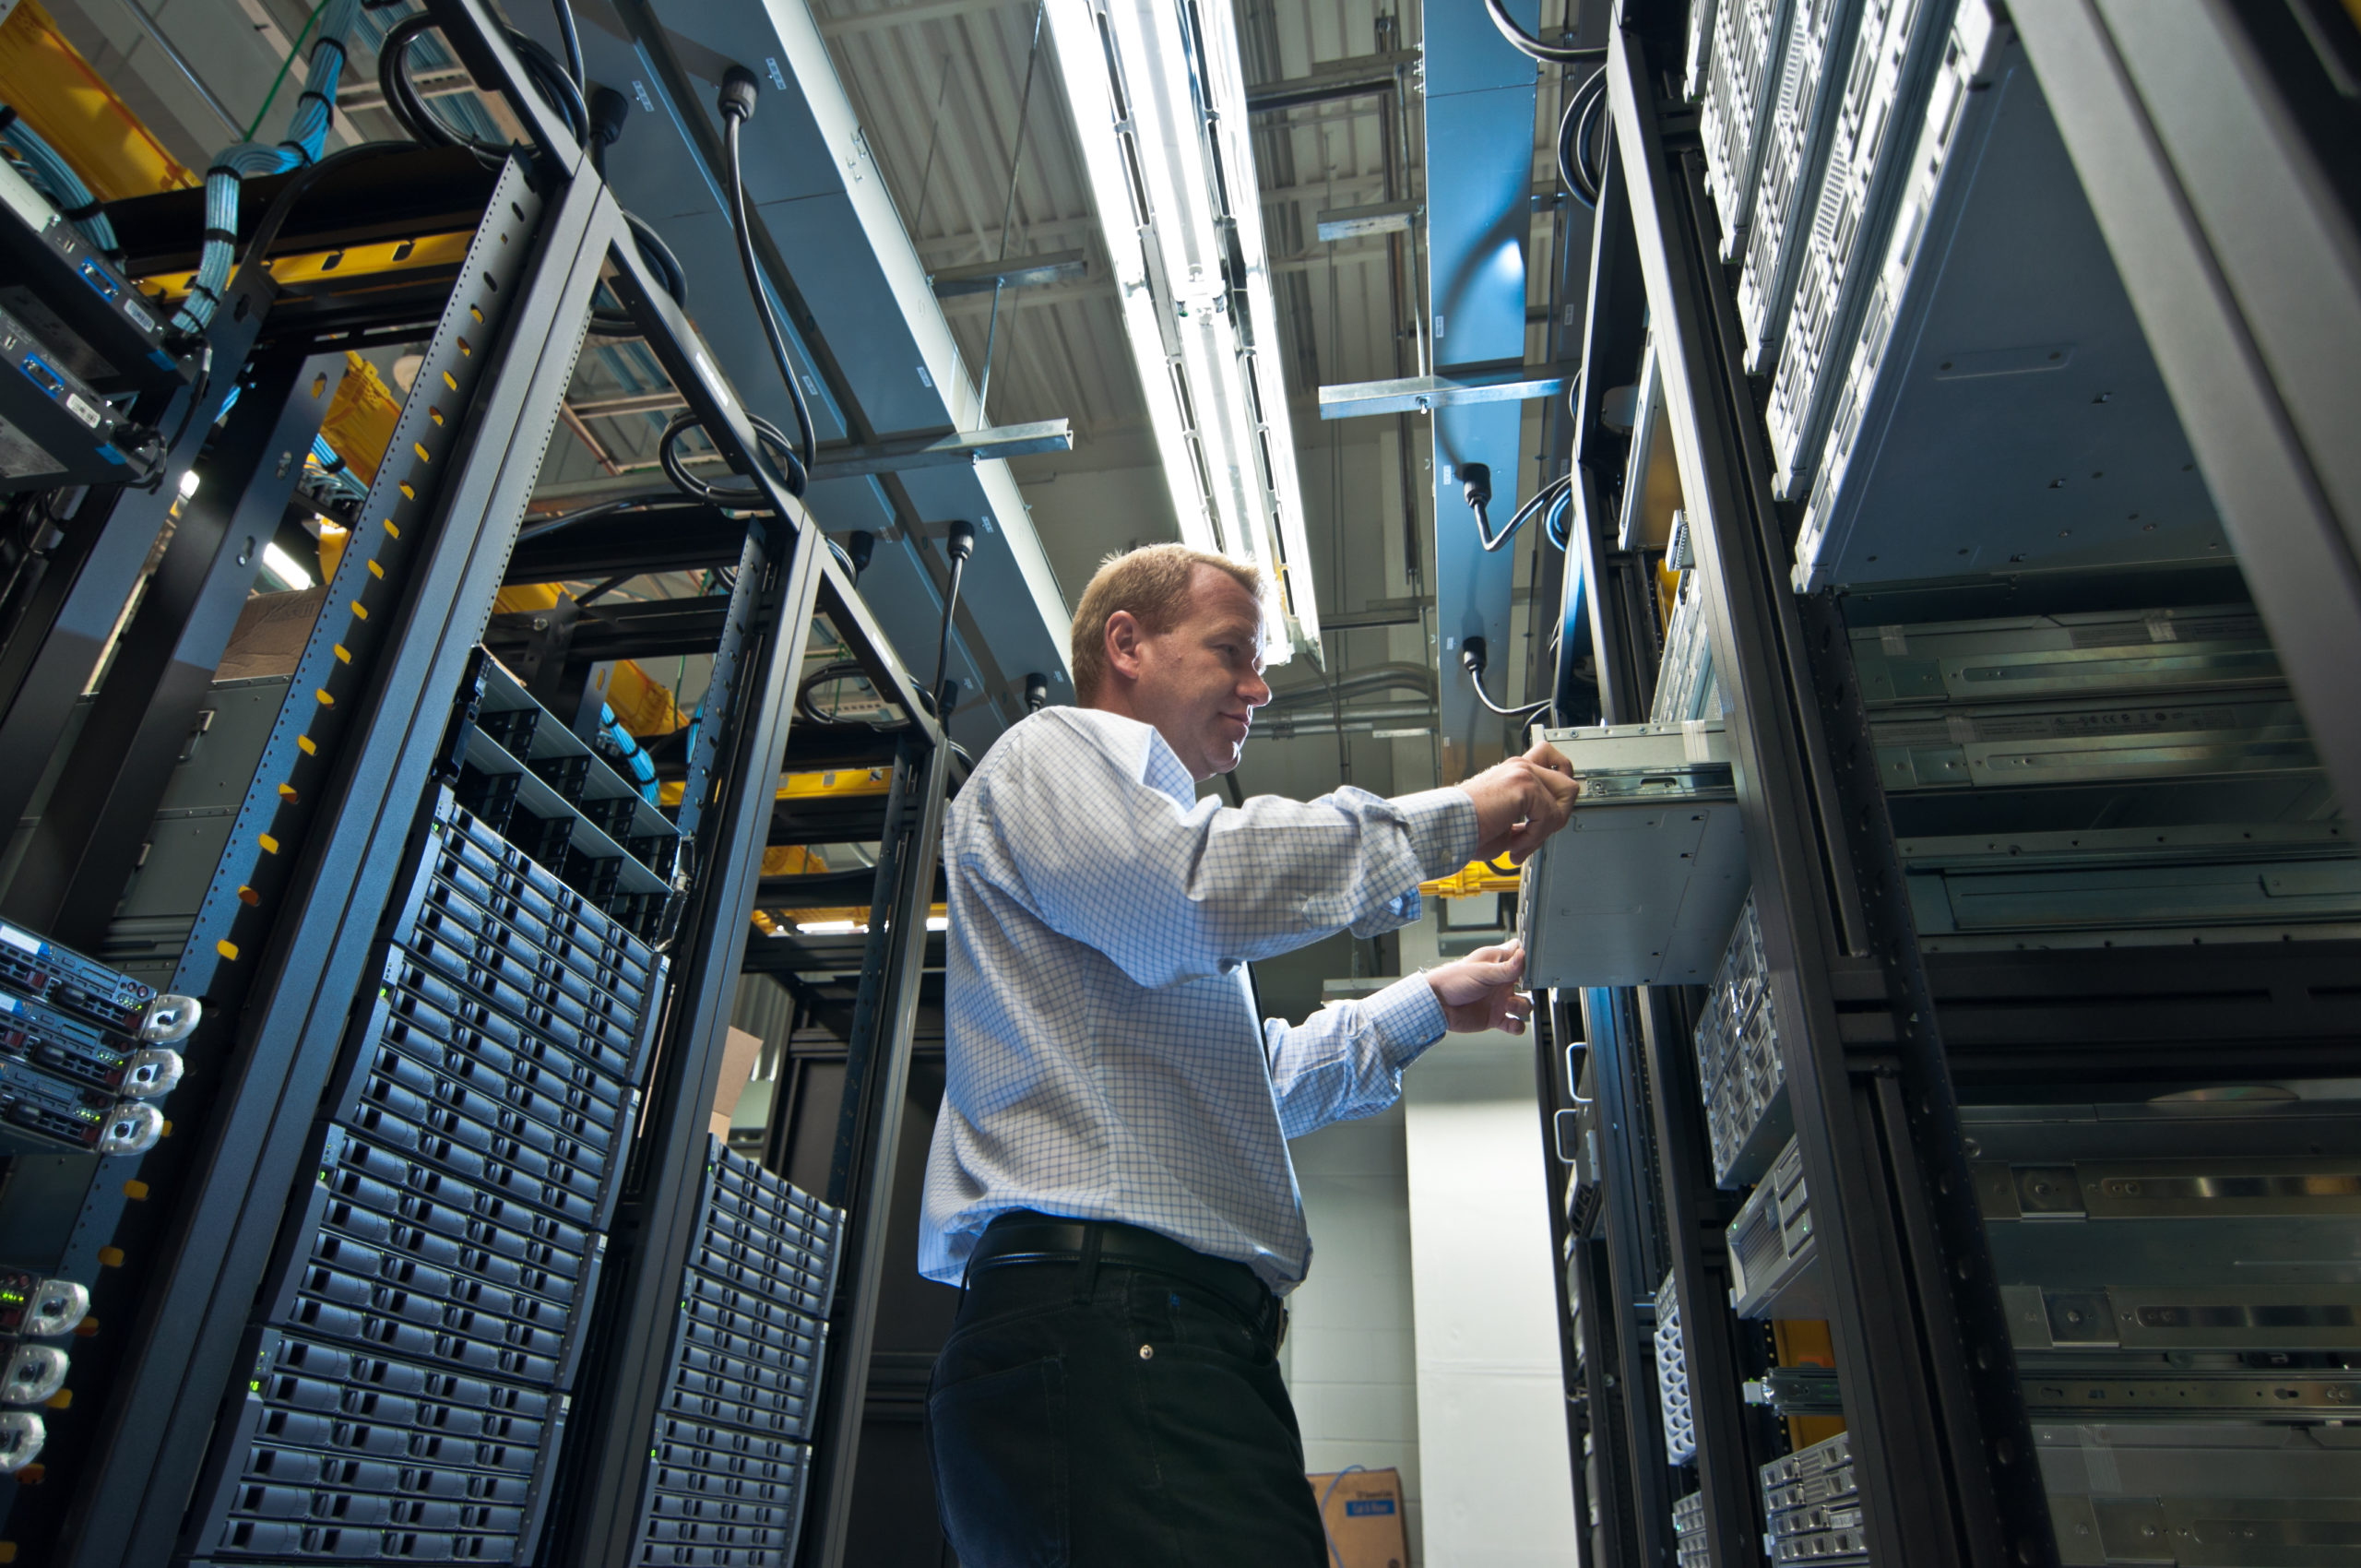 IT administrator installing a new rack mount server. Large scale storage server is also seen.